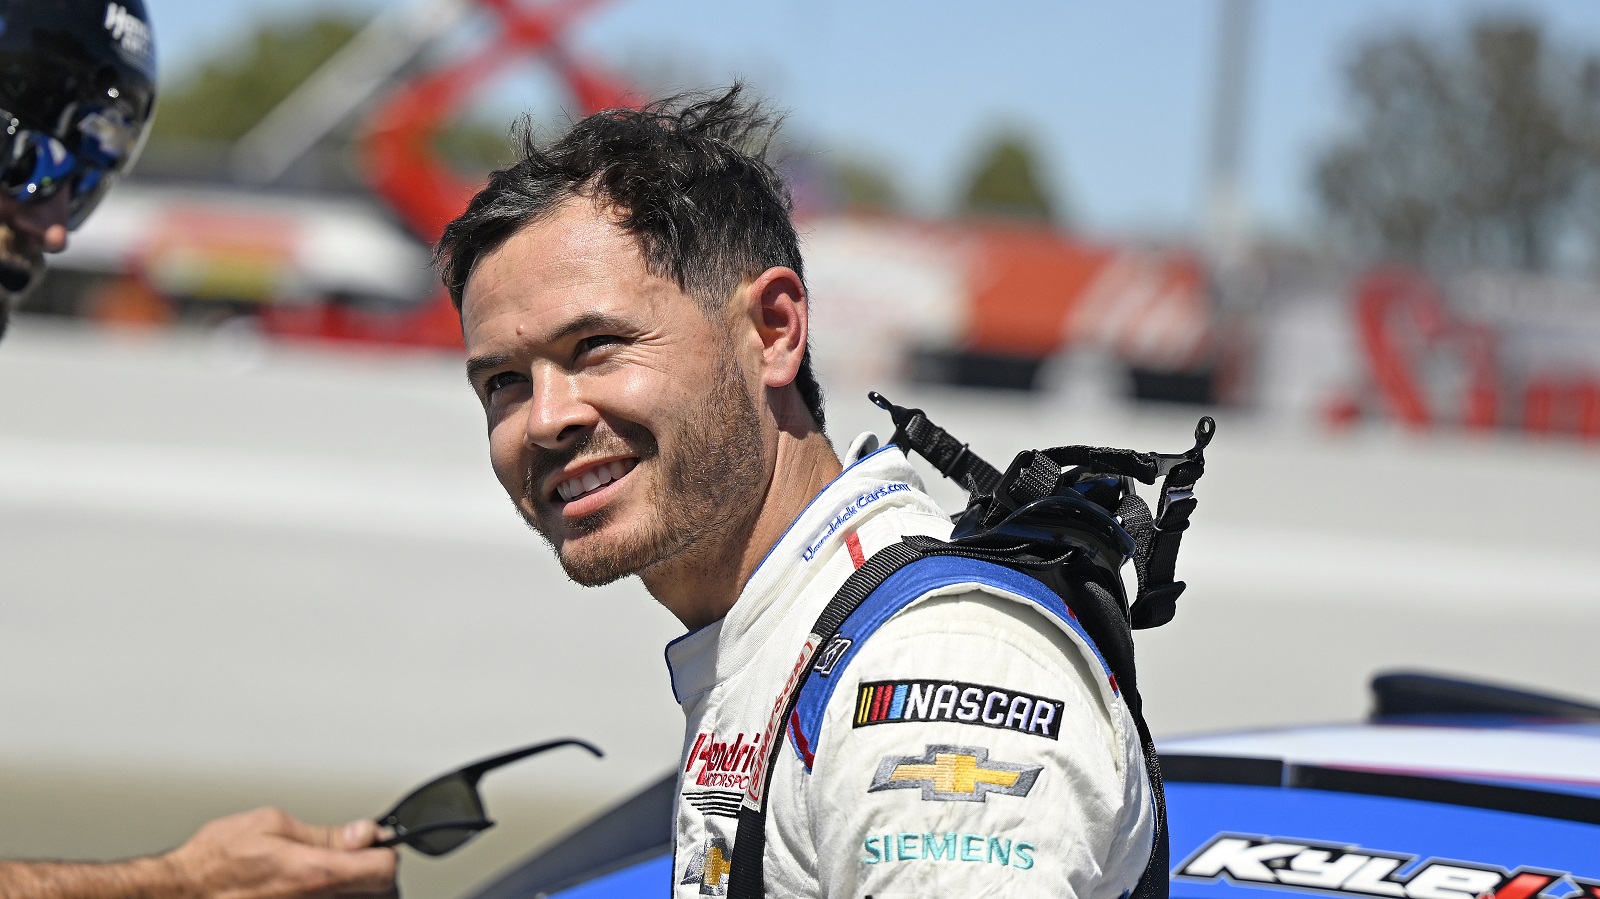 Kyle Larson climbs from the No. 5 Chevy after winning the pole for the NASCAR Cup Series Toyota/Save Mart 350 on June 11, 2022, at Sonoma Raceway. |  Will Lester/Icon Sportswire via Getty Images